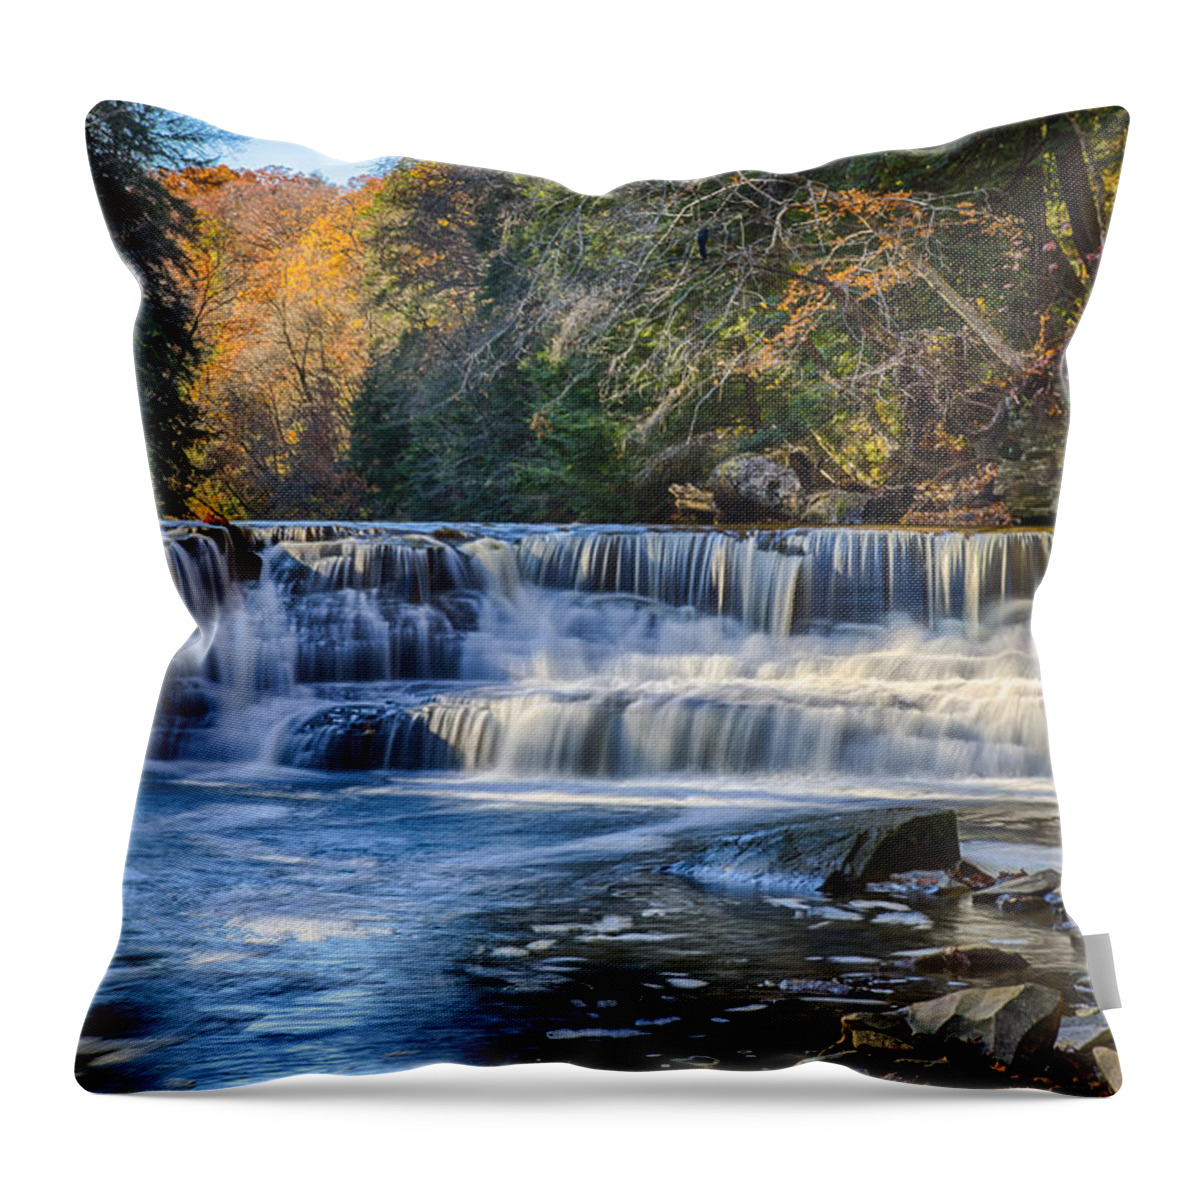 Background Throw Pillow featuring the photograph Squaw Rock - Chagrin River Falls #1 by Jack R Perry